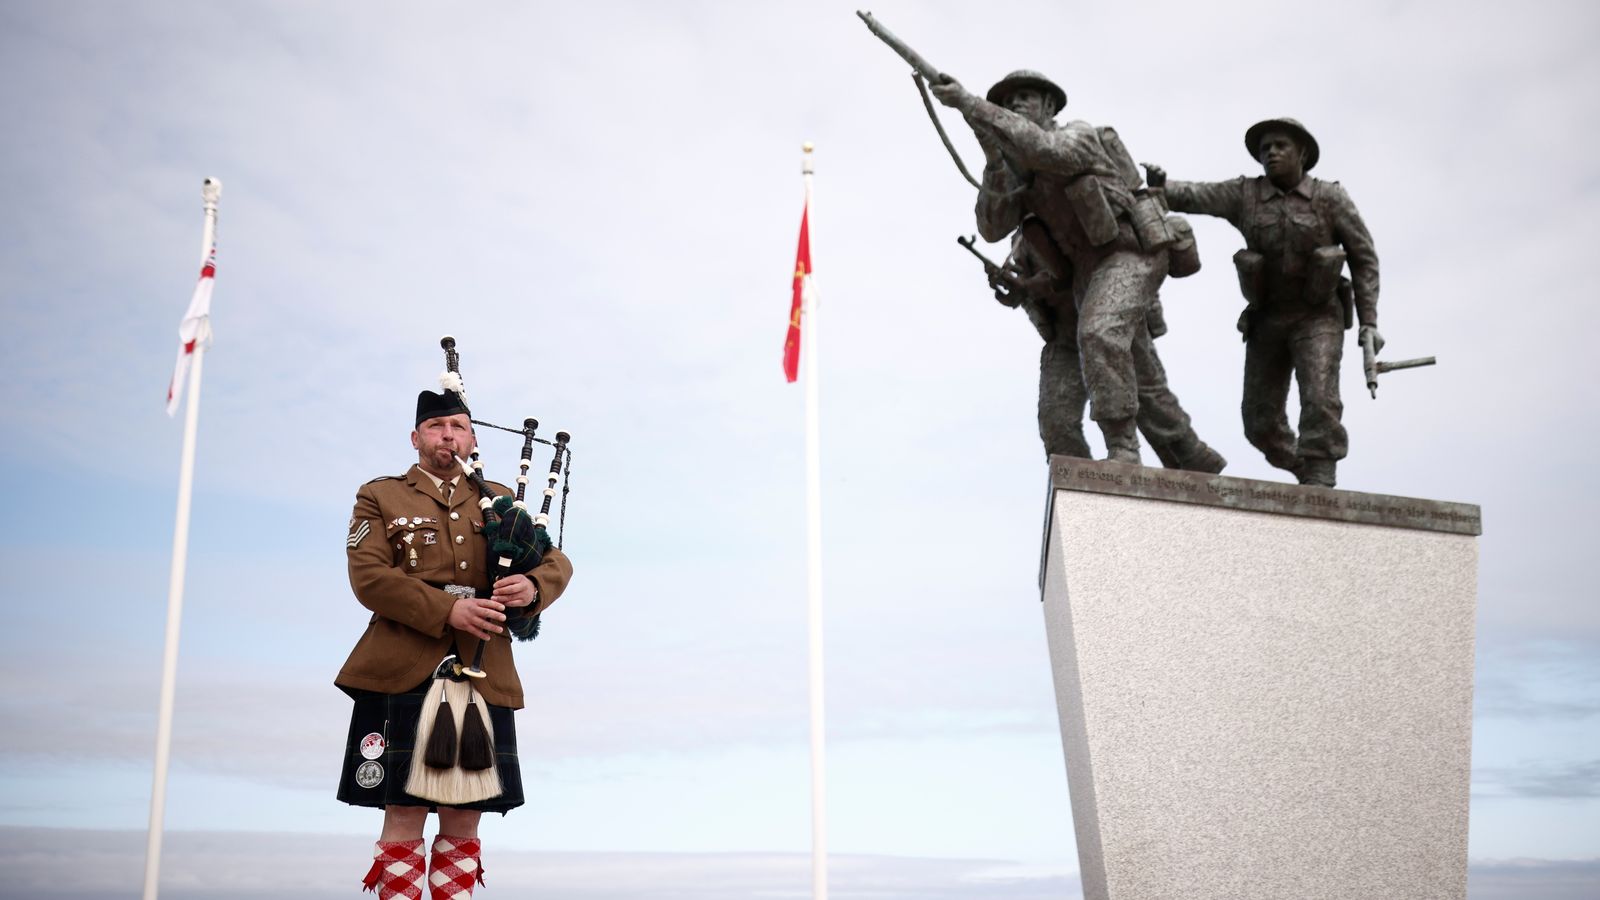 Prince Charles praises ‘courage and sacrifice’ of D-Day fallen as new memorial opens